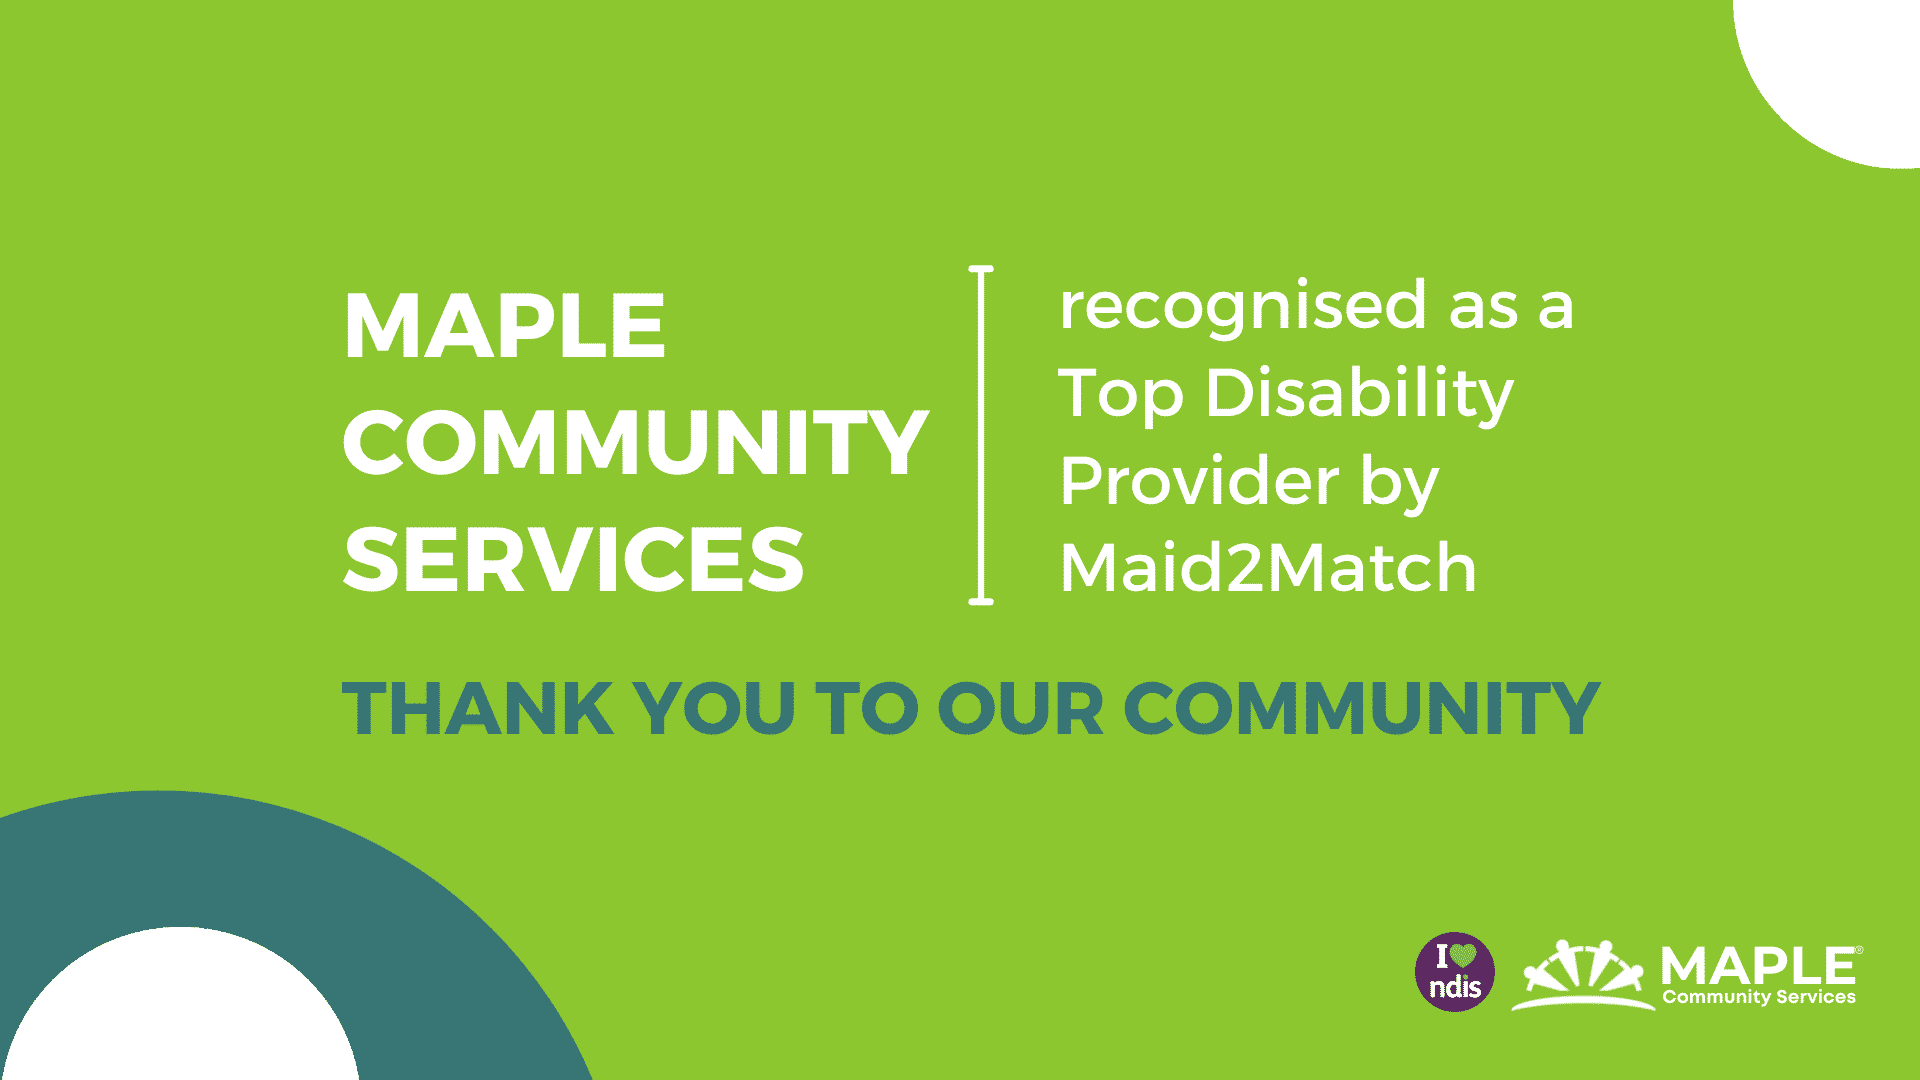 Maple Community Services is recognised by Maid2Match as a Top Support Provider within Sydney